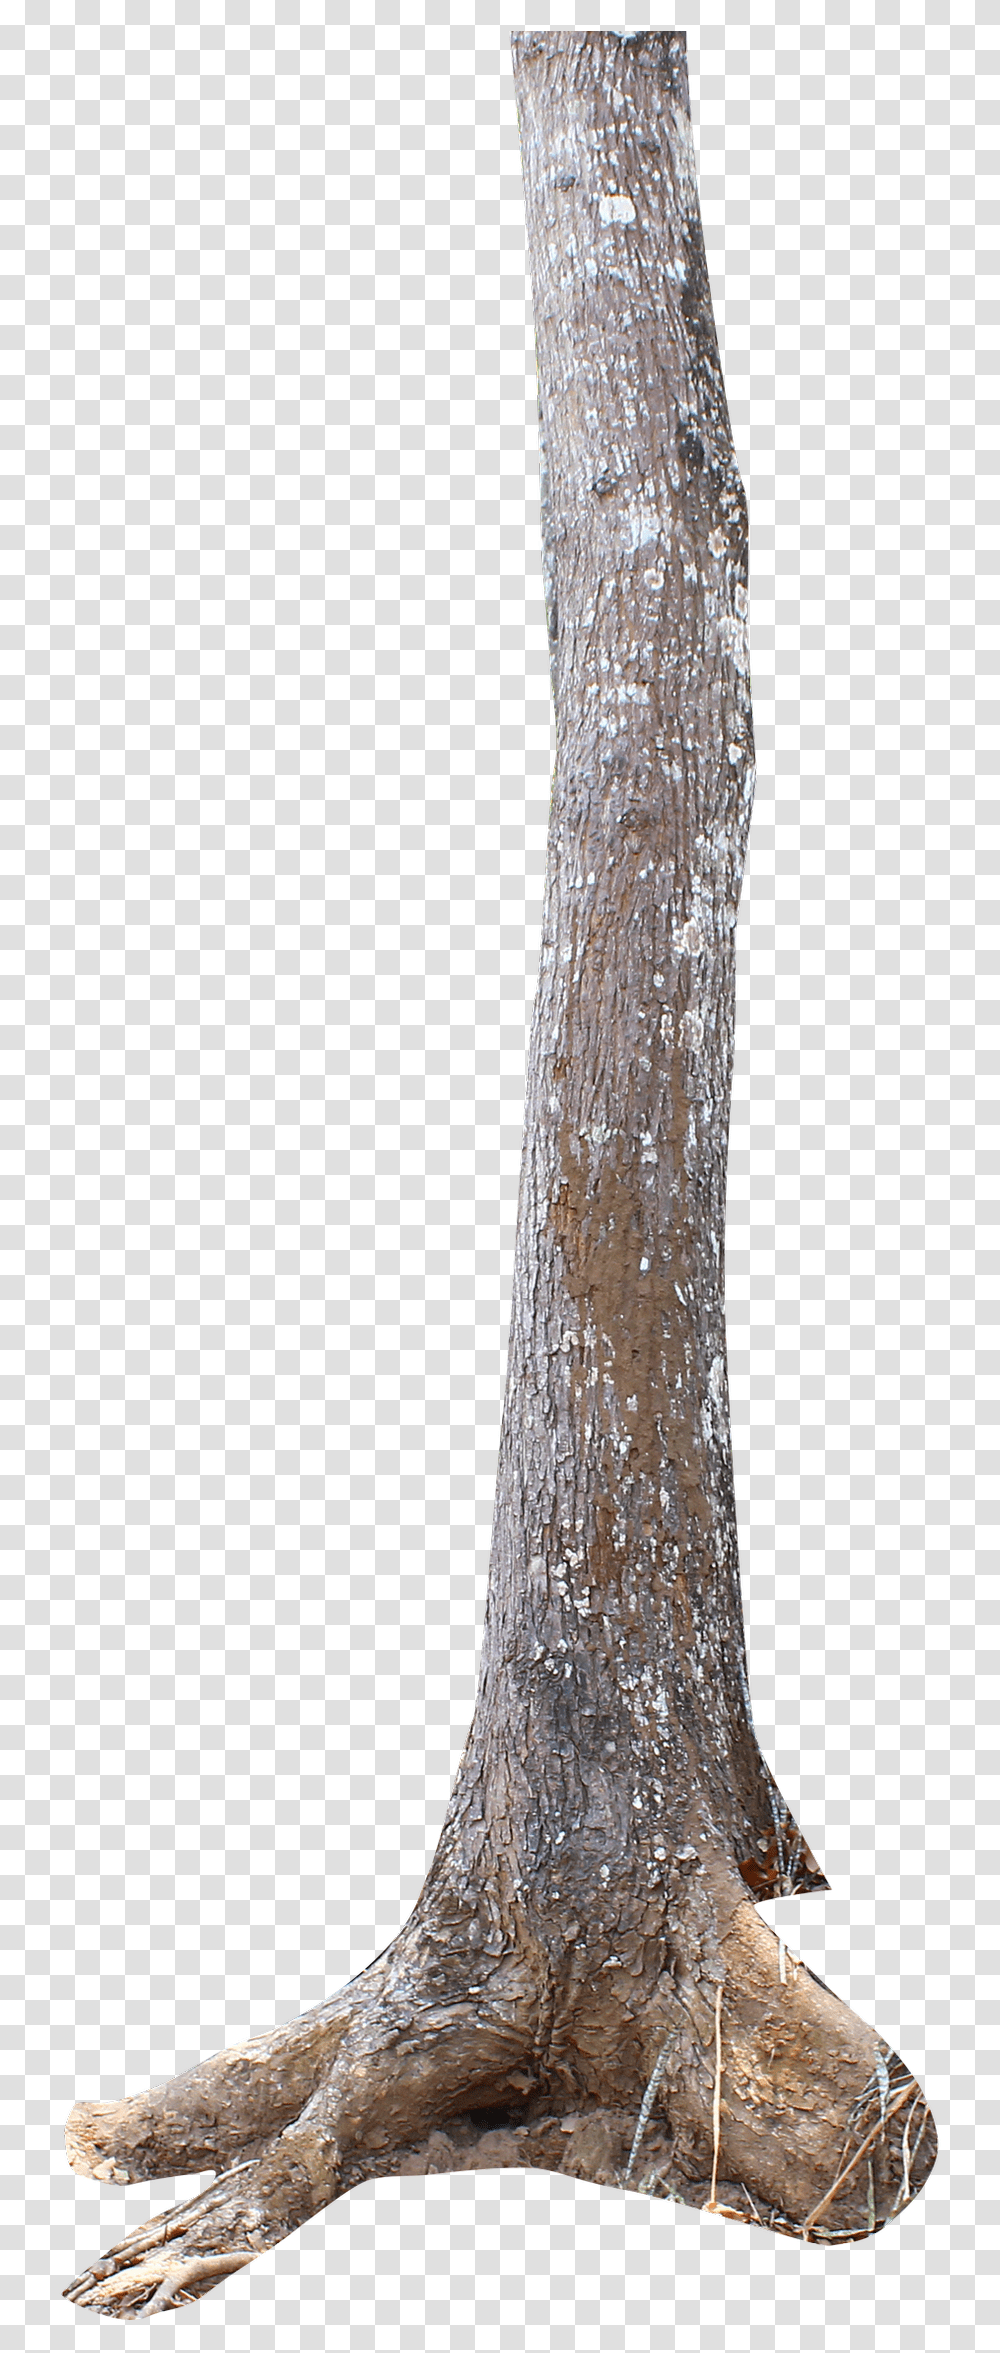 Thumb Image Tree Trunk, Sword, Blade, Weapon, Weaponry Transparent Png